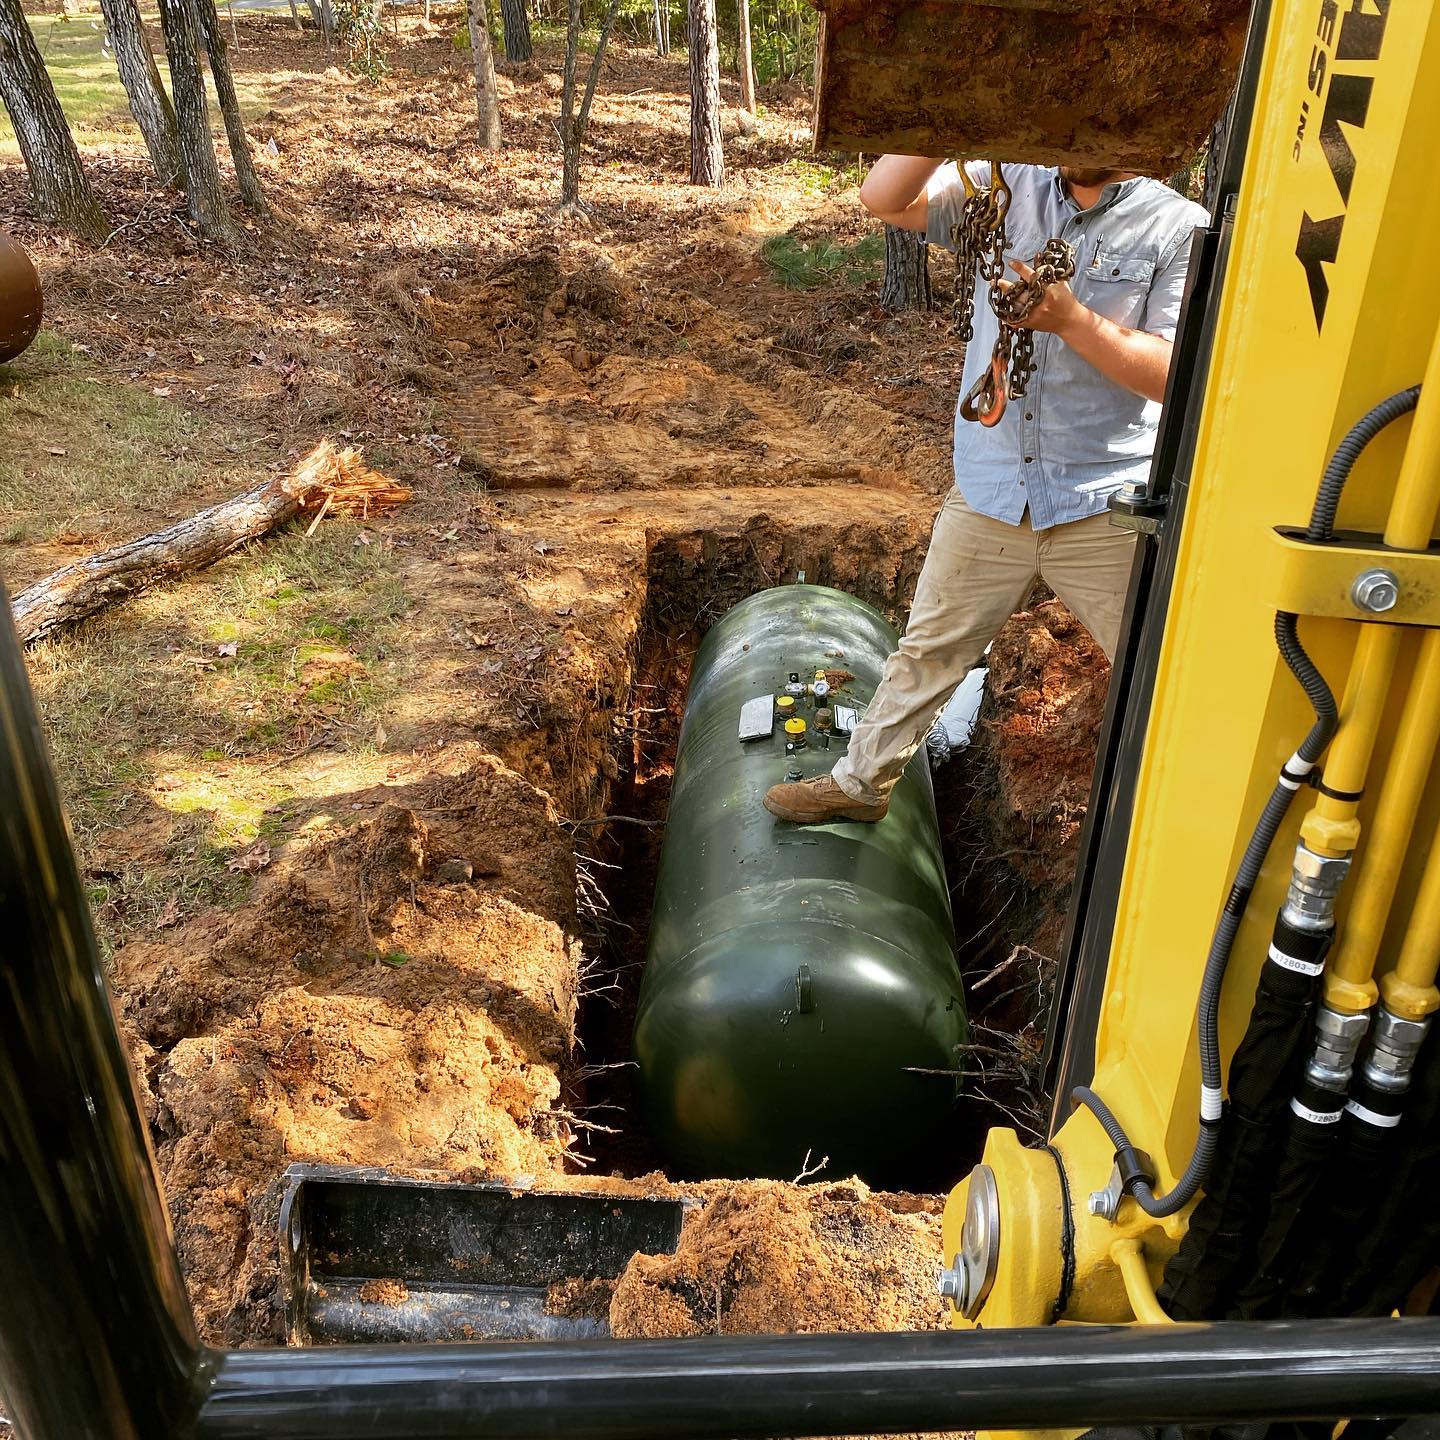 Moving Propane Tank Underground - Donny's Propane Gas How To Move A 250 Gallon Propane Tank